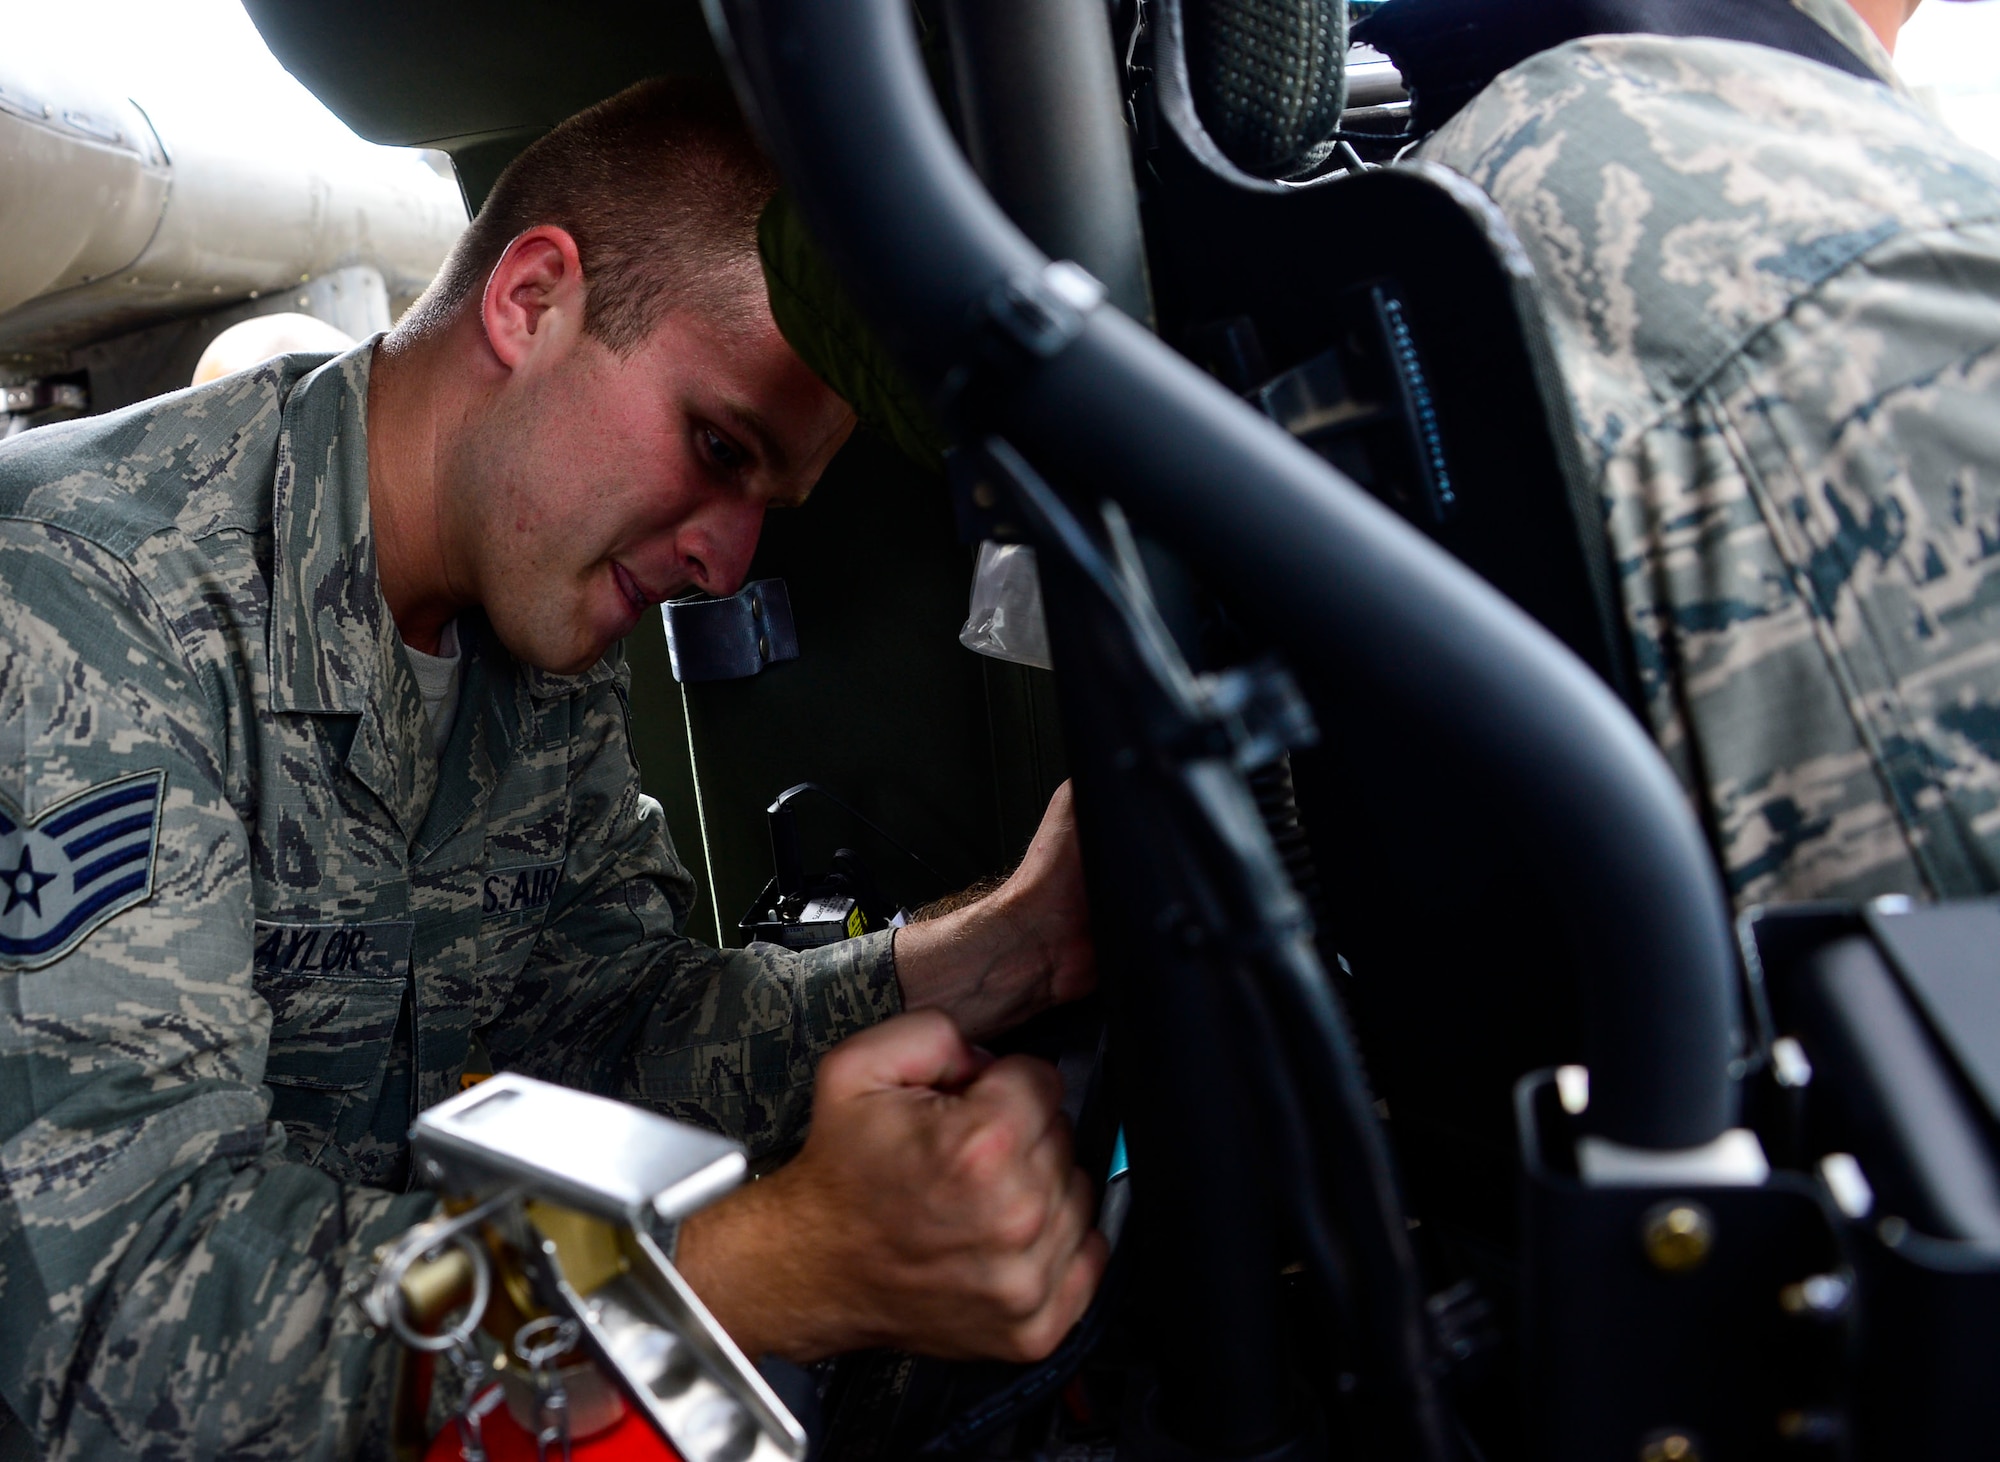 U.S. Air Force Staff Sgt. Samuel Taylor, 612th Air Base Squadron firefighter, tries to remove the pilot seat from UH-60 Blackhawk helicopter during aircraft crash rescue training with the 1-228th Aviation Regiment at Soto Cano Air Base, Honduras, Jan. 15, 2015.  At least once a quarter, the 612th ABS teams up with the 1-228th Avn. Reg. to review aircraft crash rescue training and emergency procedures for the UH-60 Blackhawk helicopter. (U.S. Air Force photo/Tech. Sgt. Heather Redman)